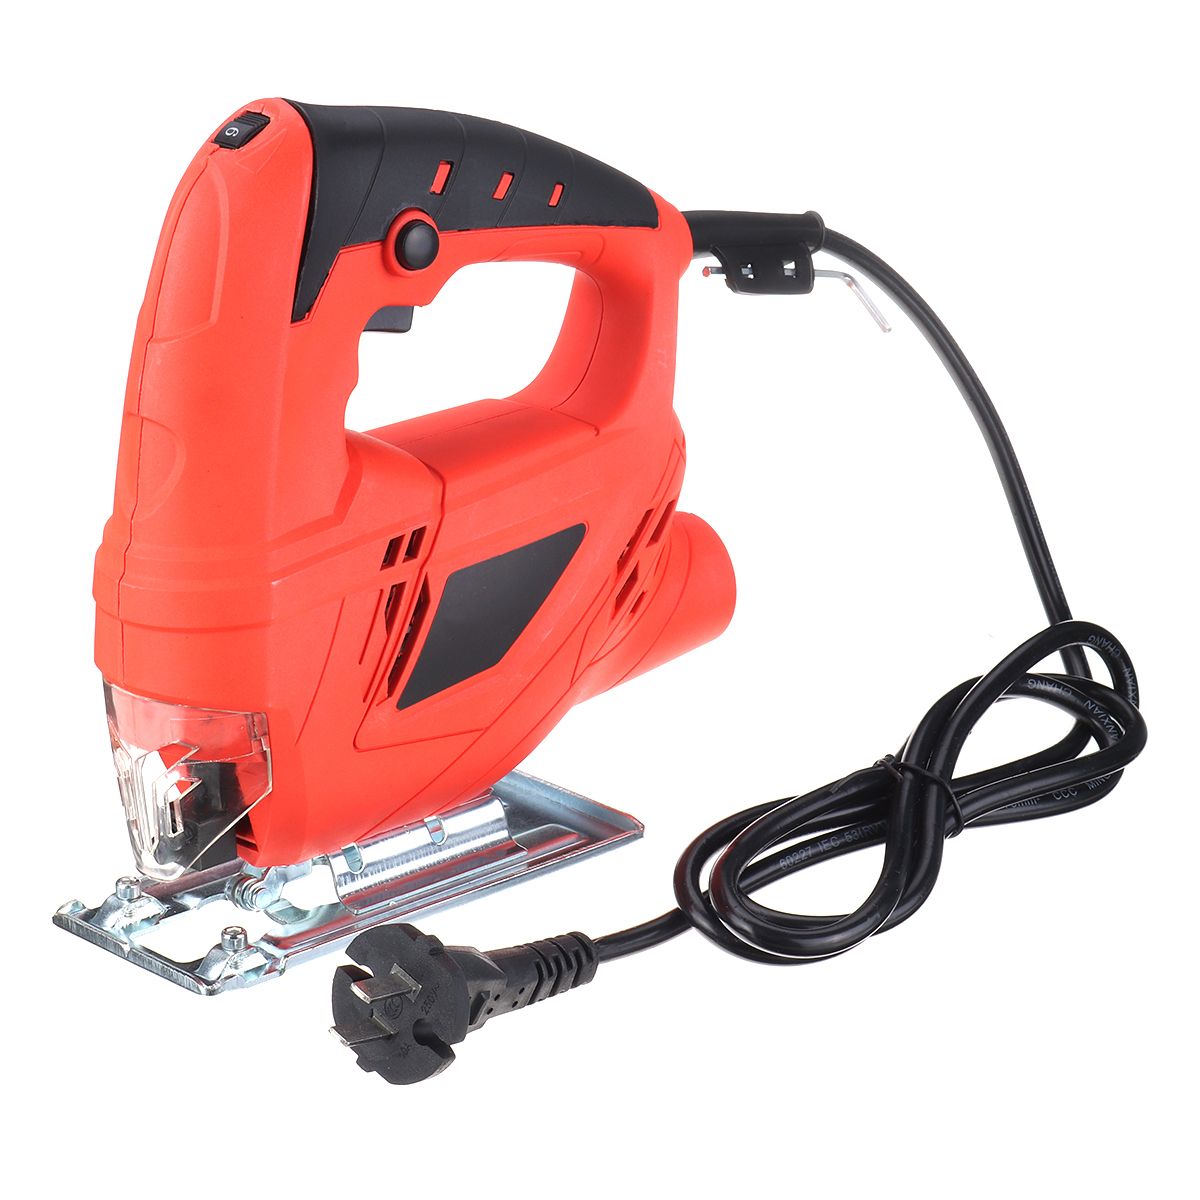 220V-Electric-Saw-3000rpm-Adjustable-6-Speed-Straight-45deg-Curved-Cutting-Tool-1439545